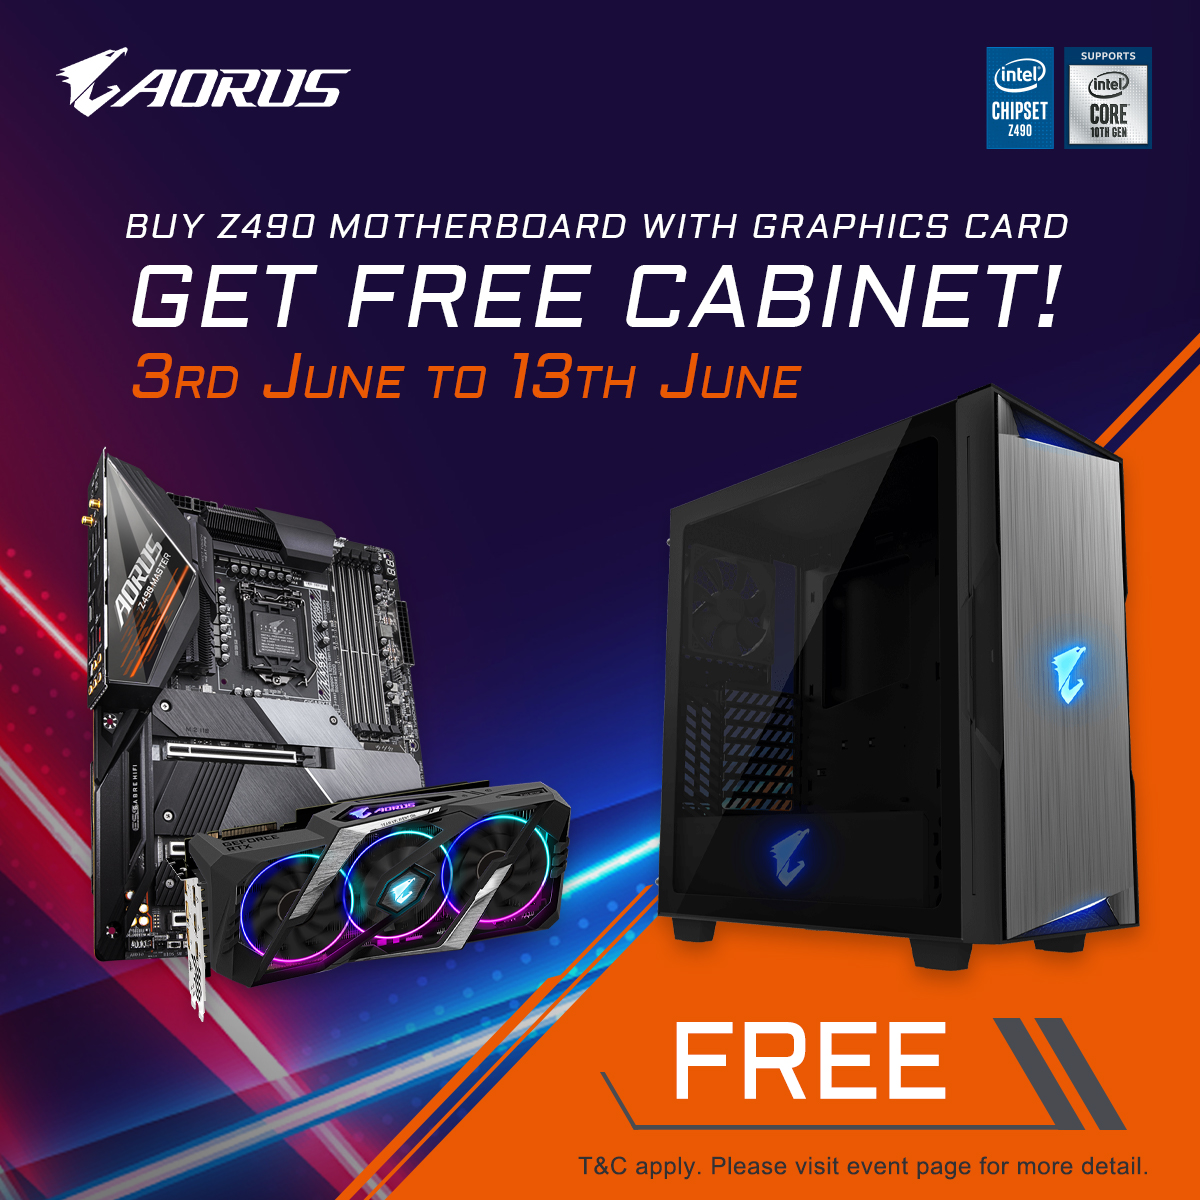 Buy a Z490 Motherboard + Graphics Card & get Cabinet FREE!